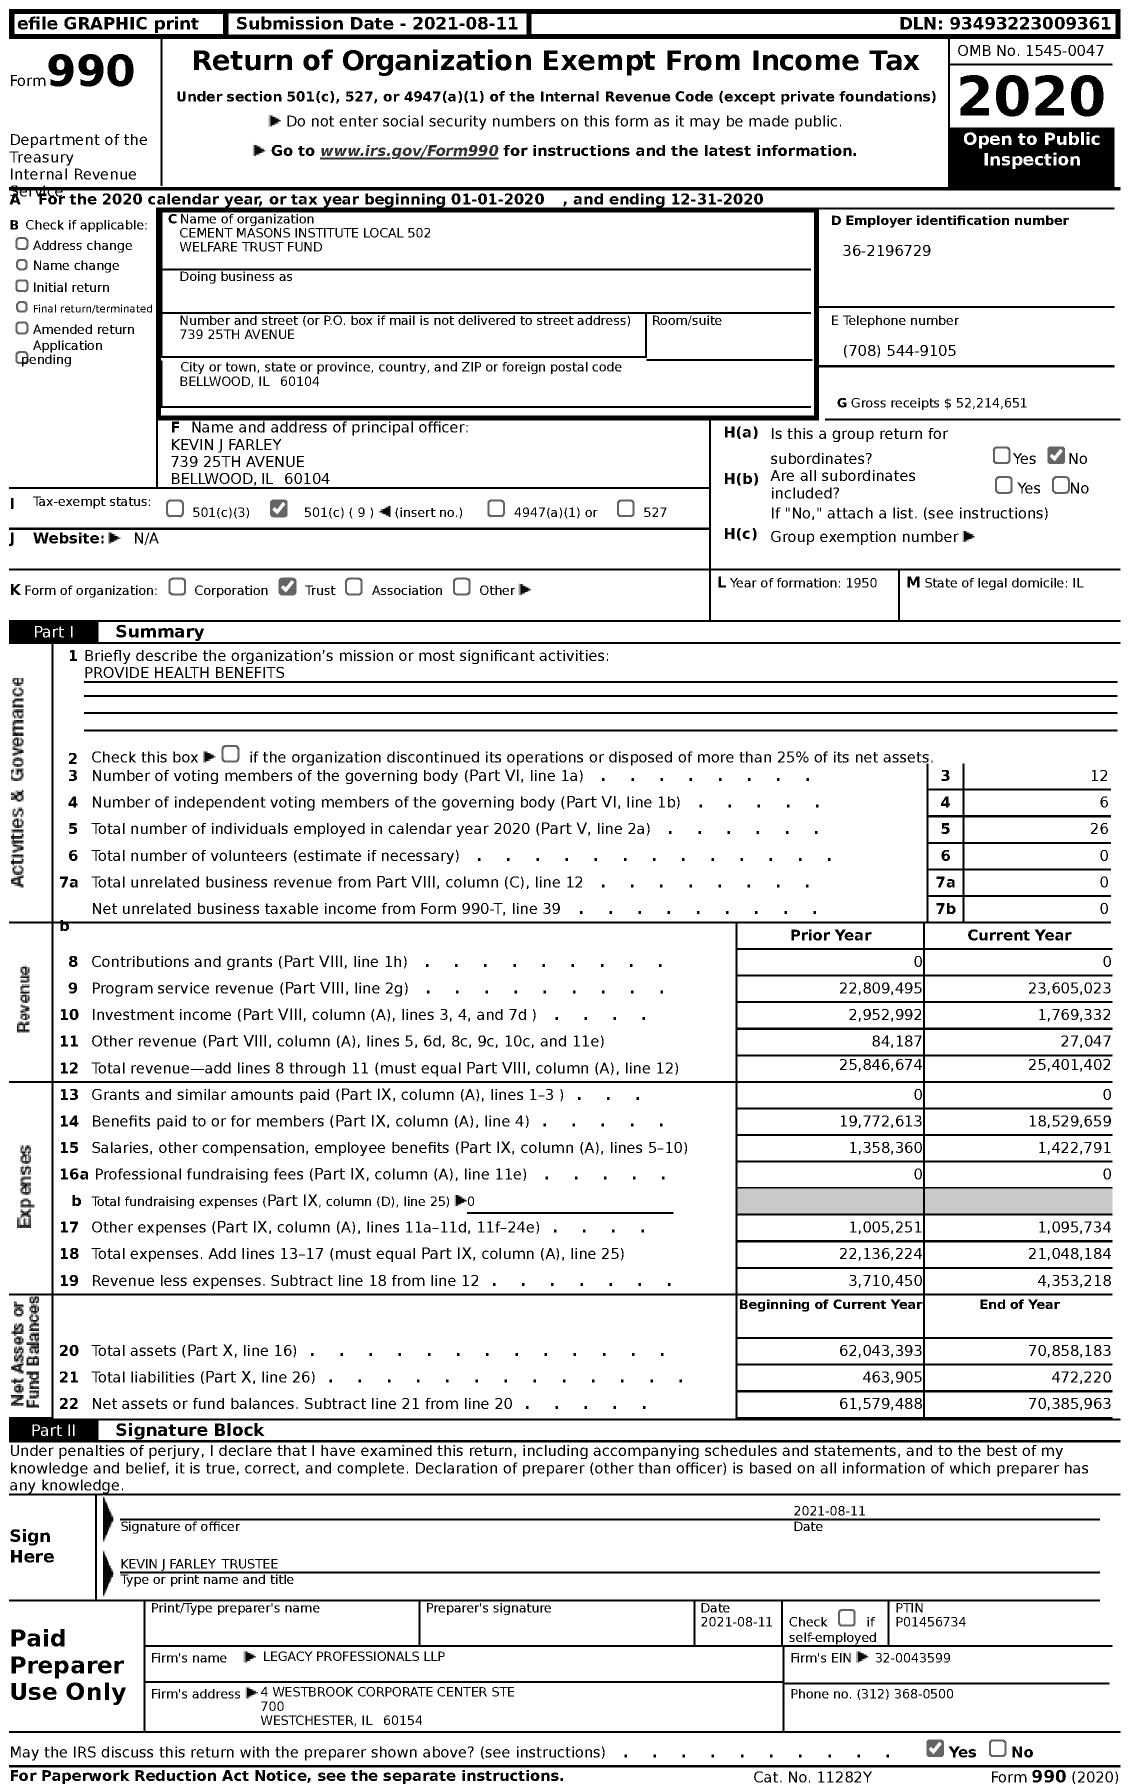 Image of first page of 2020 Form 990 for Cement Masons Institute Local 502 Welfare Trust Fund